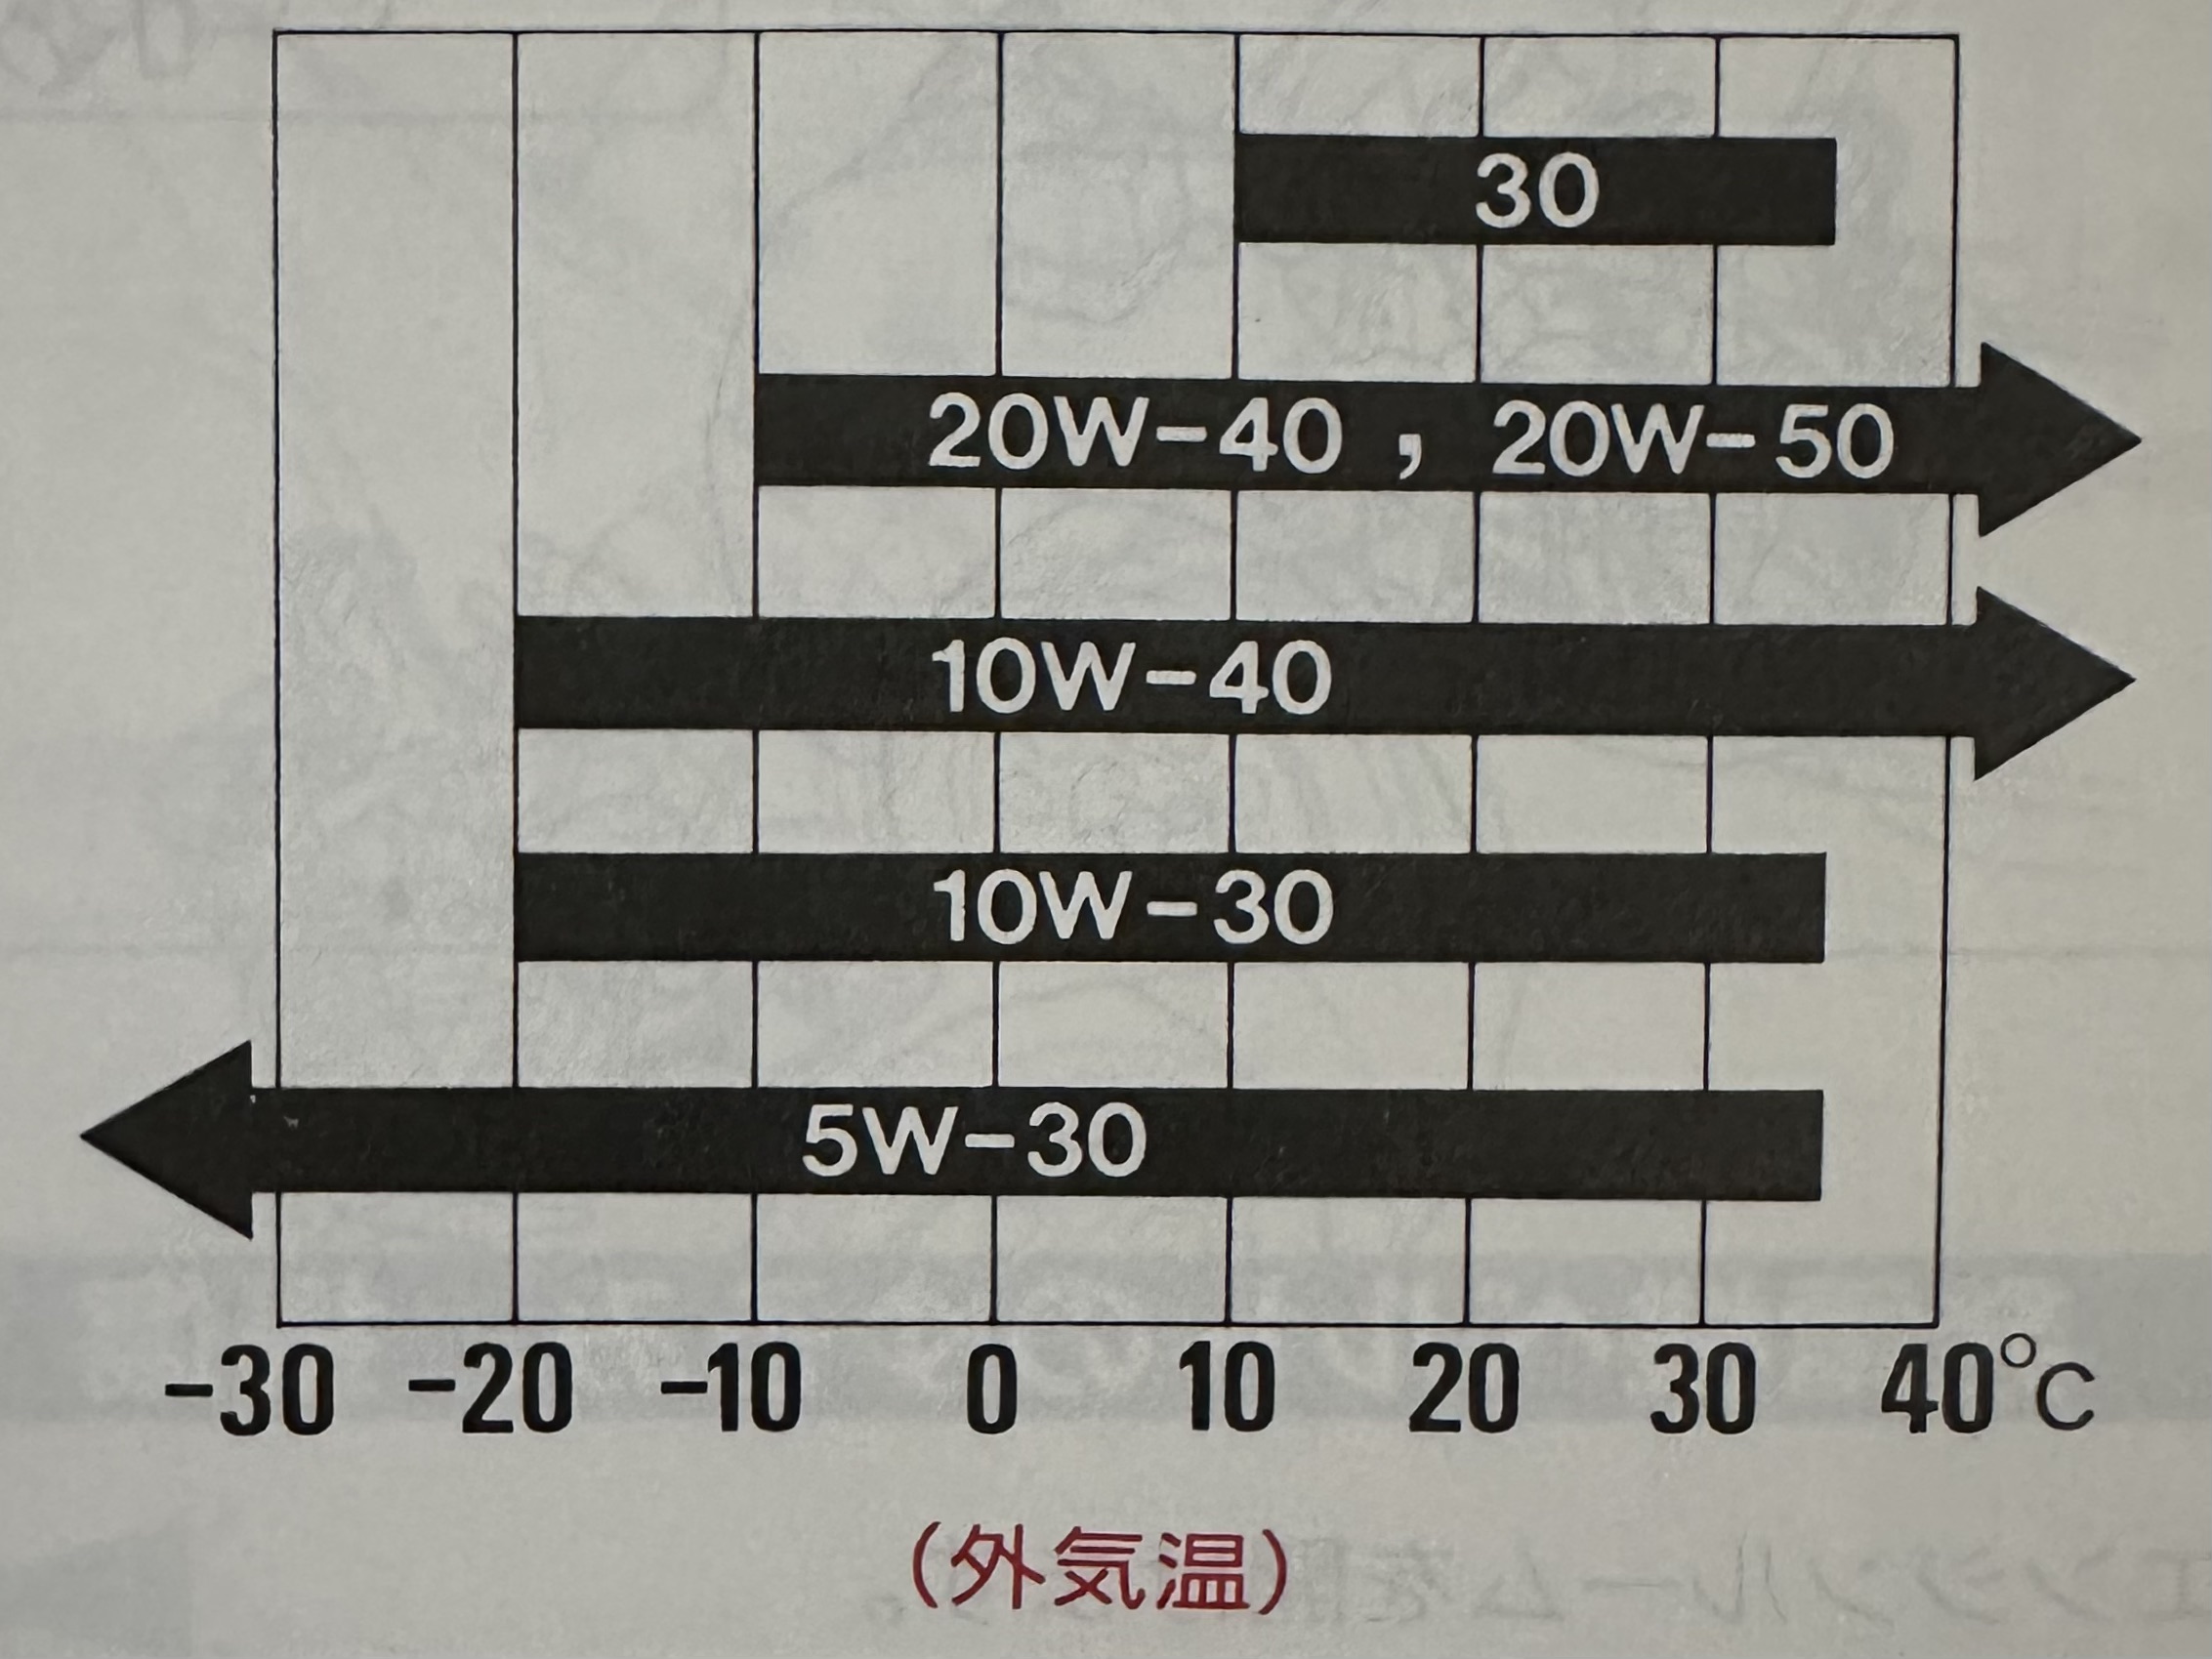 Chart of recommended oil weights by outside temperature.